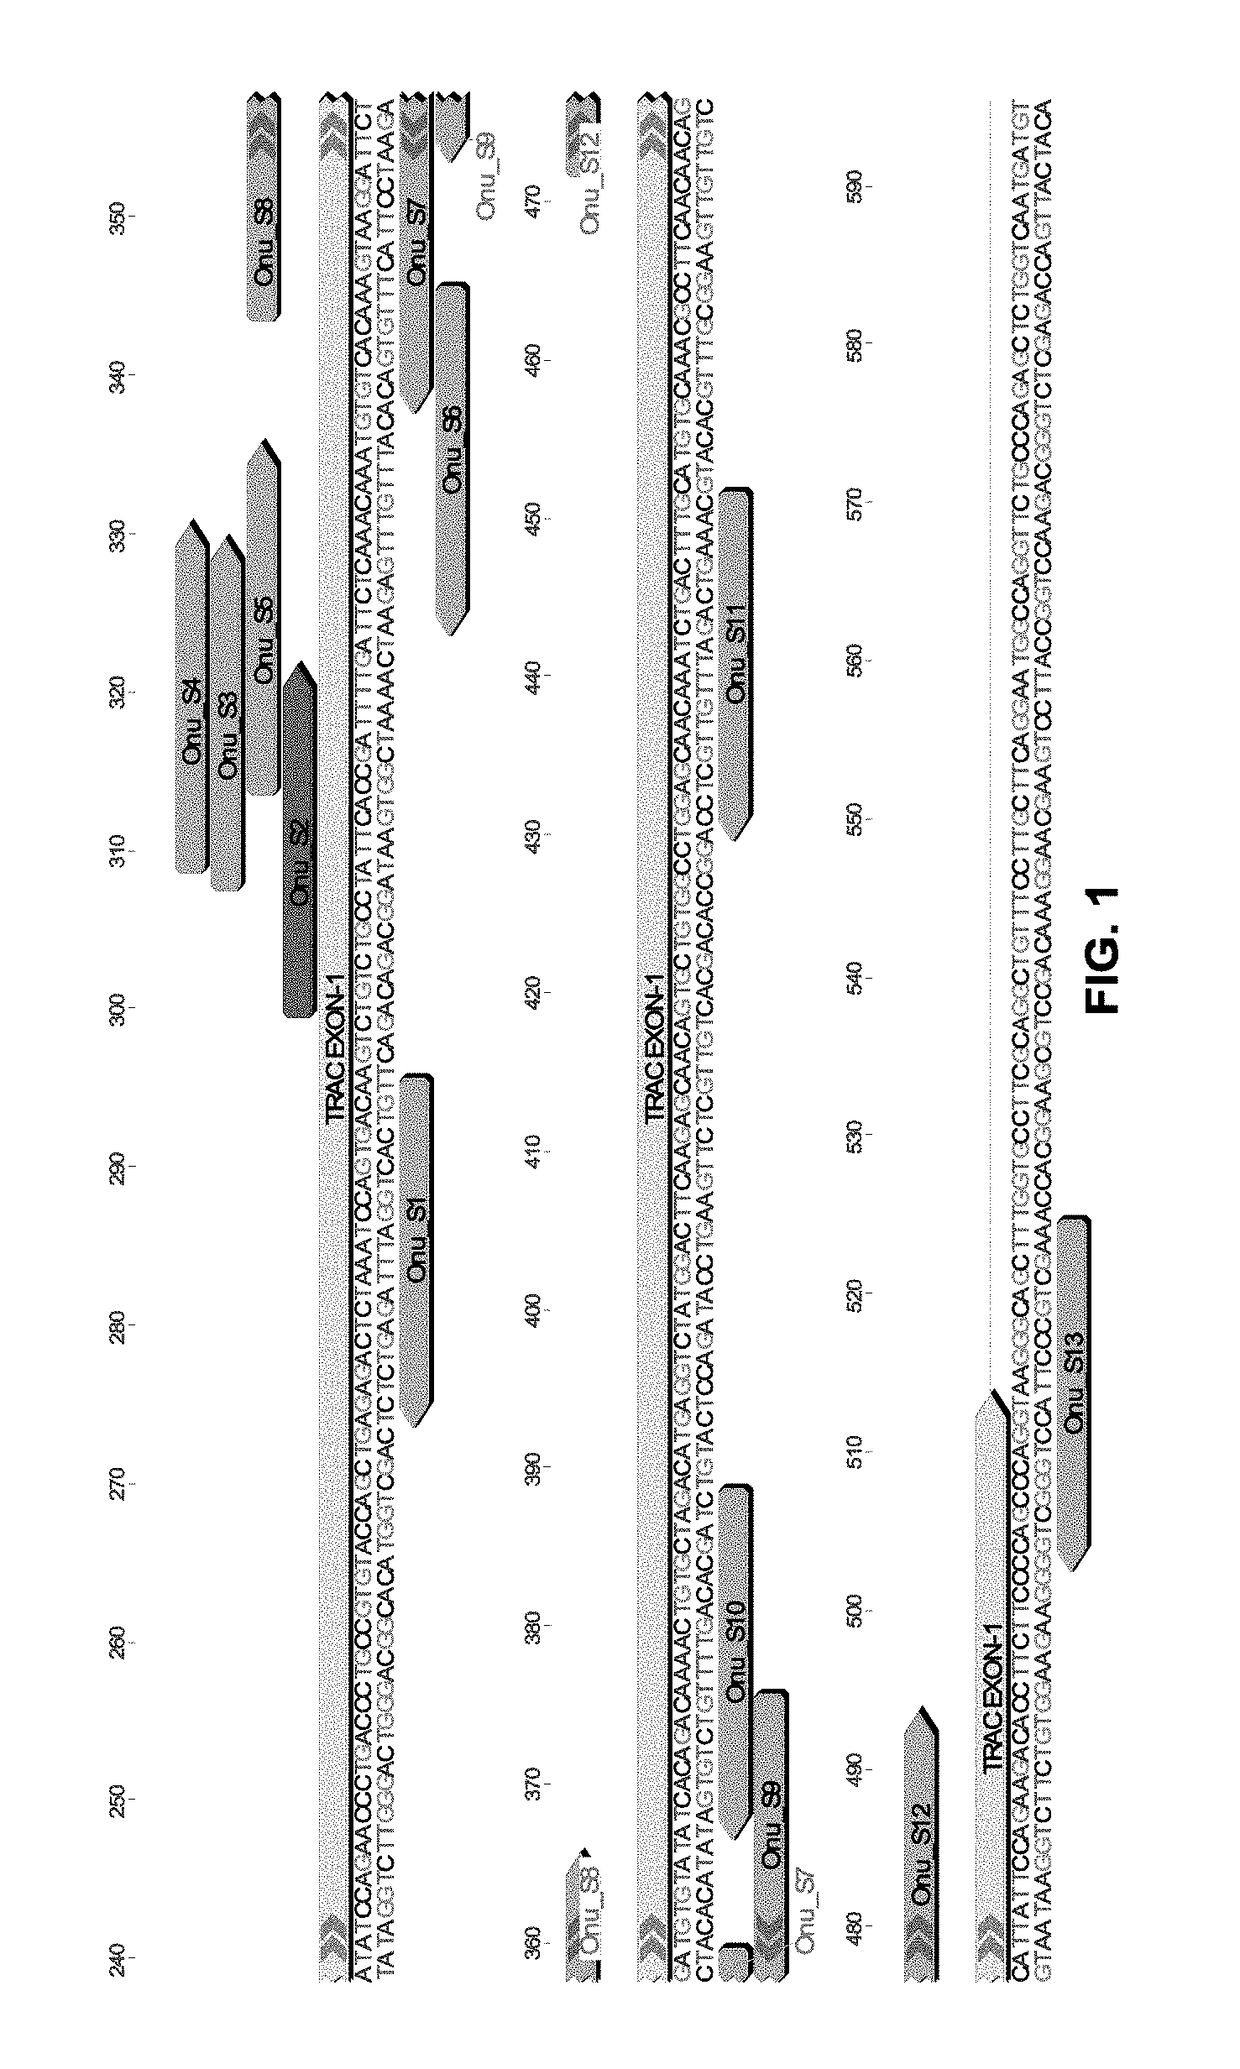 LAGLIDADG homing endonuclease cleaving the T cell receptor alpha gene and uses thereof